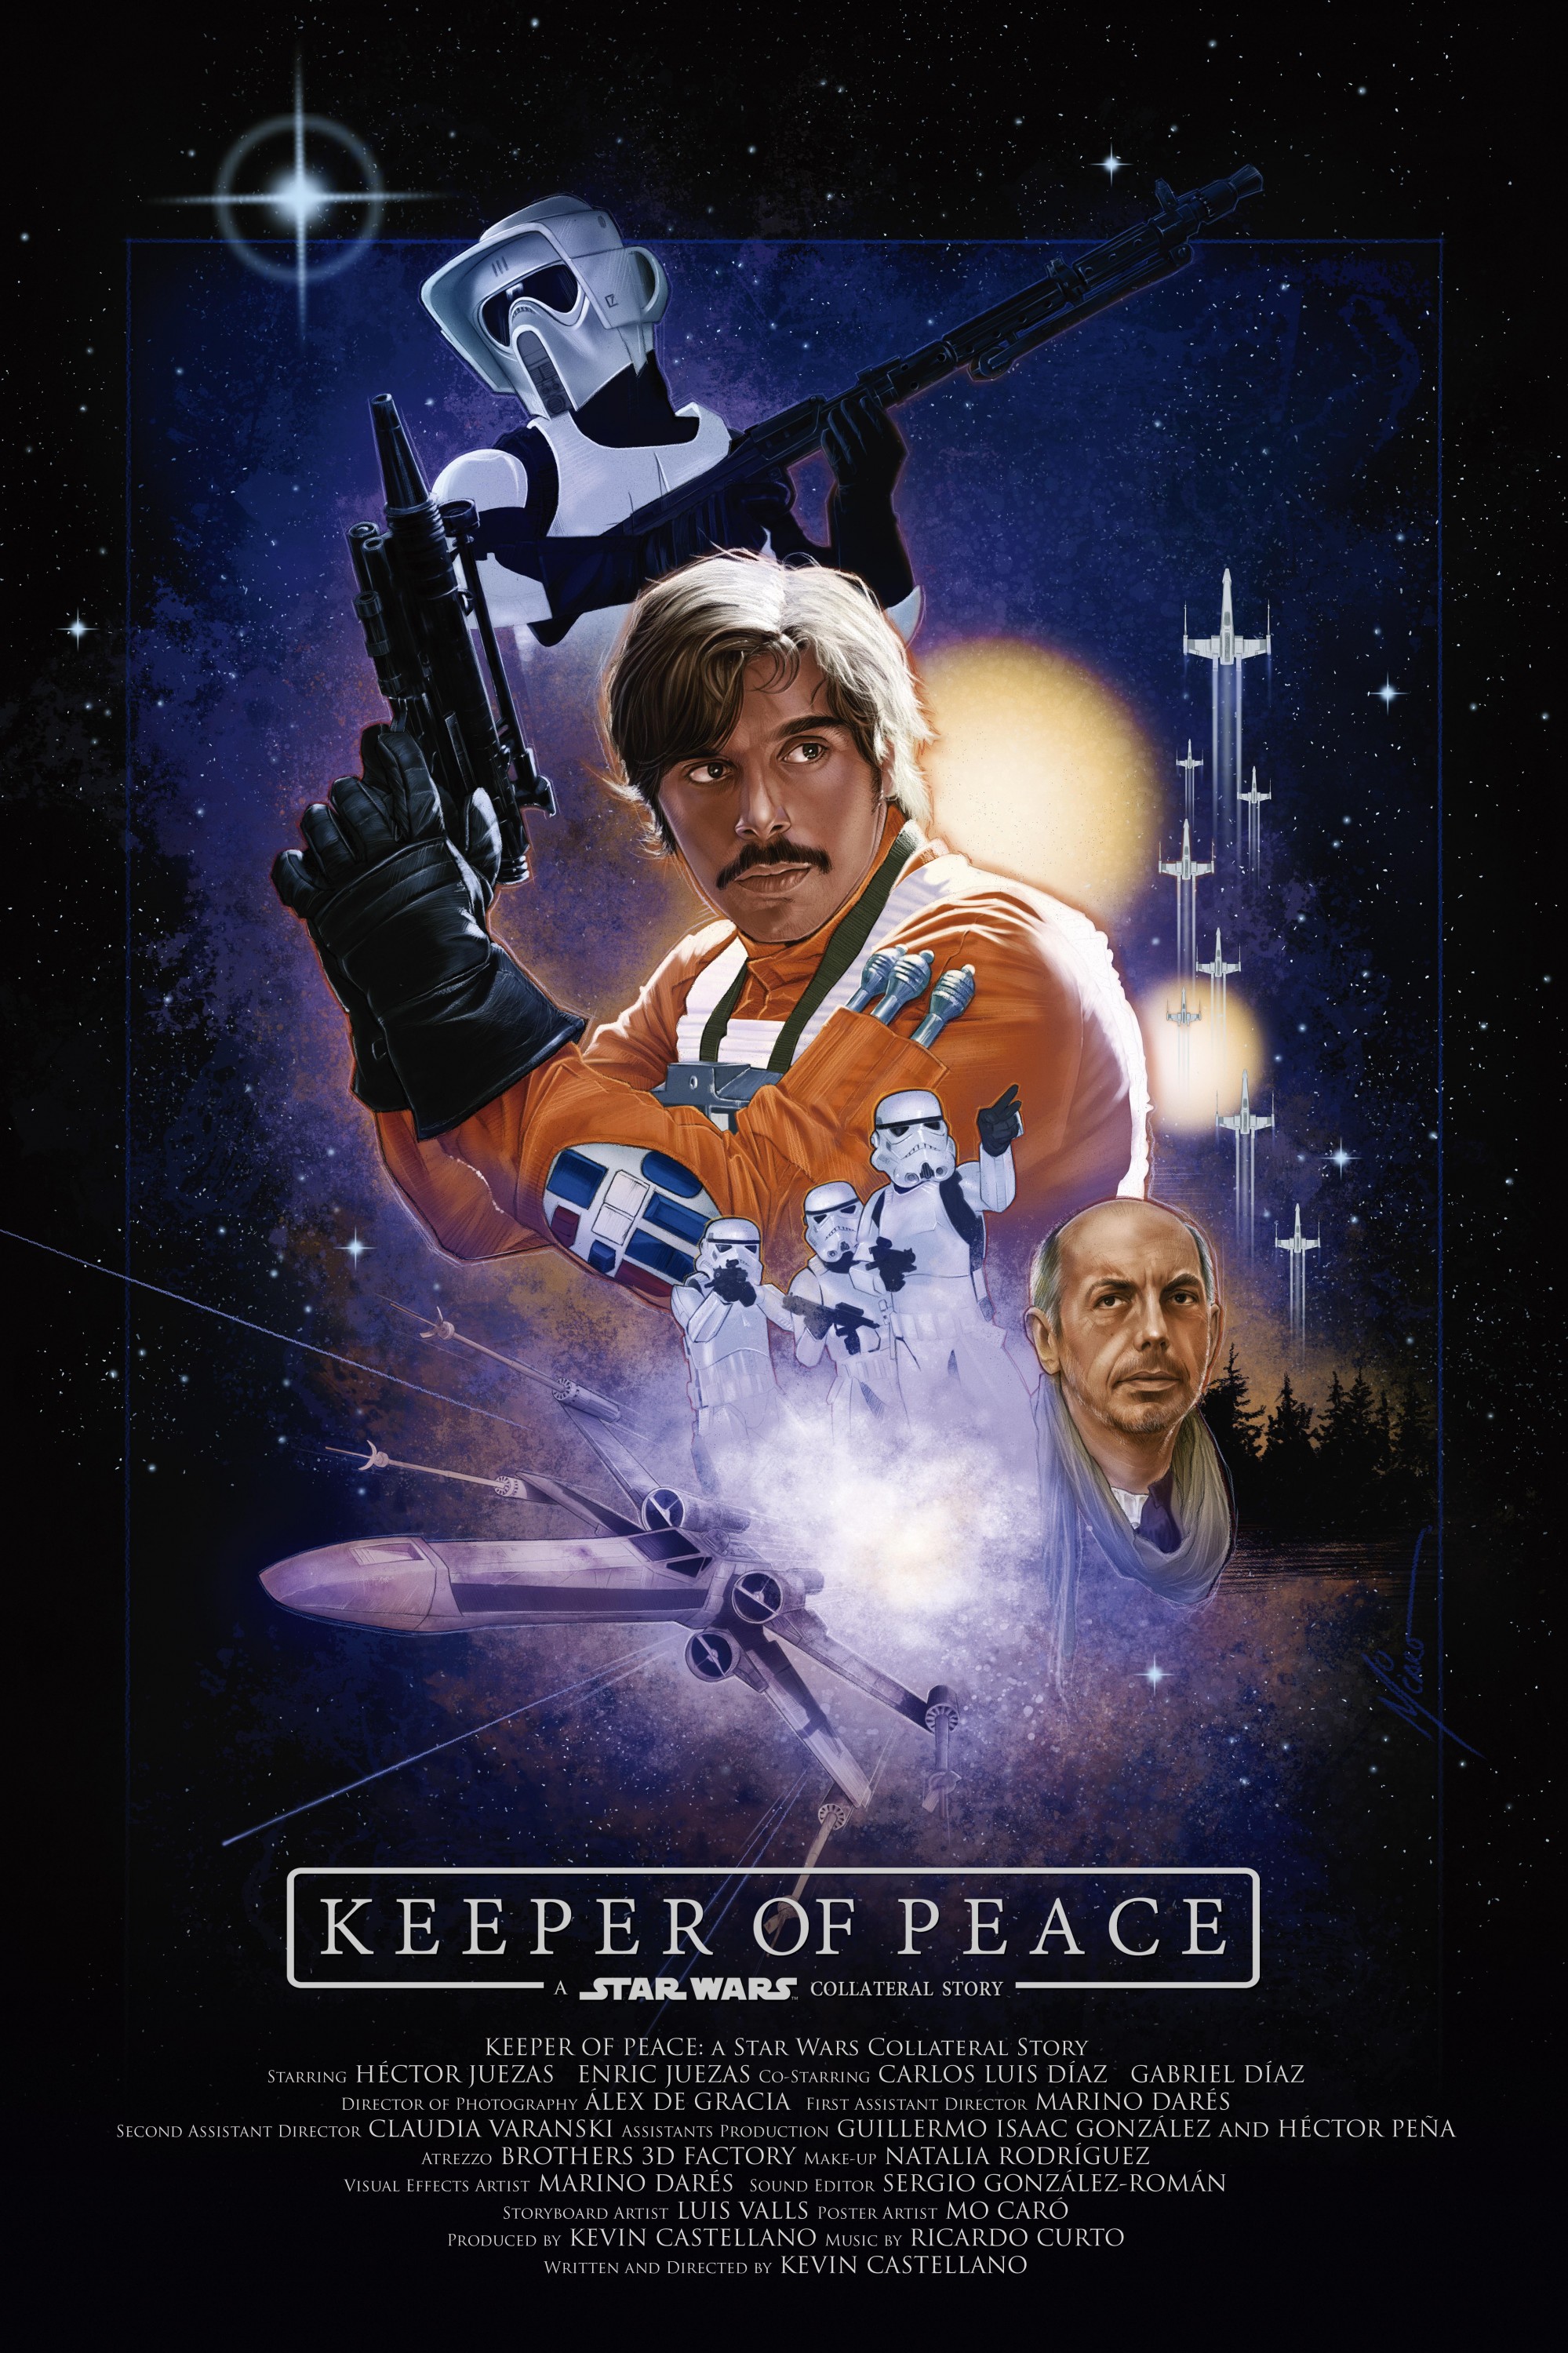 Mega Sized Movie Poster Image for Keeper of Peace: A Star Wars Collateral Story